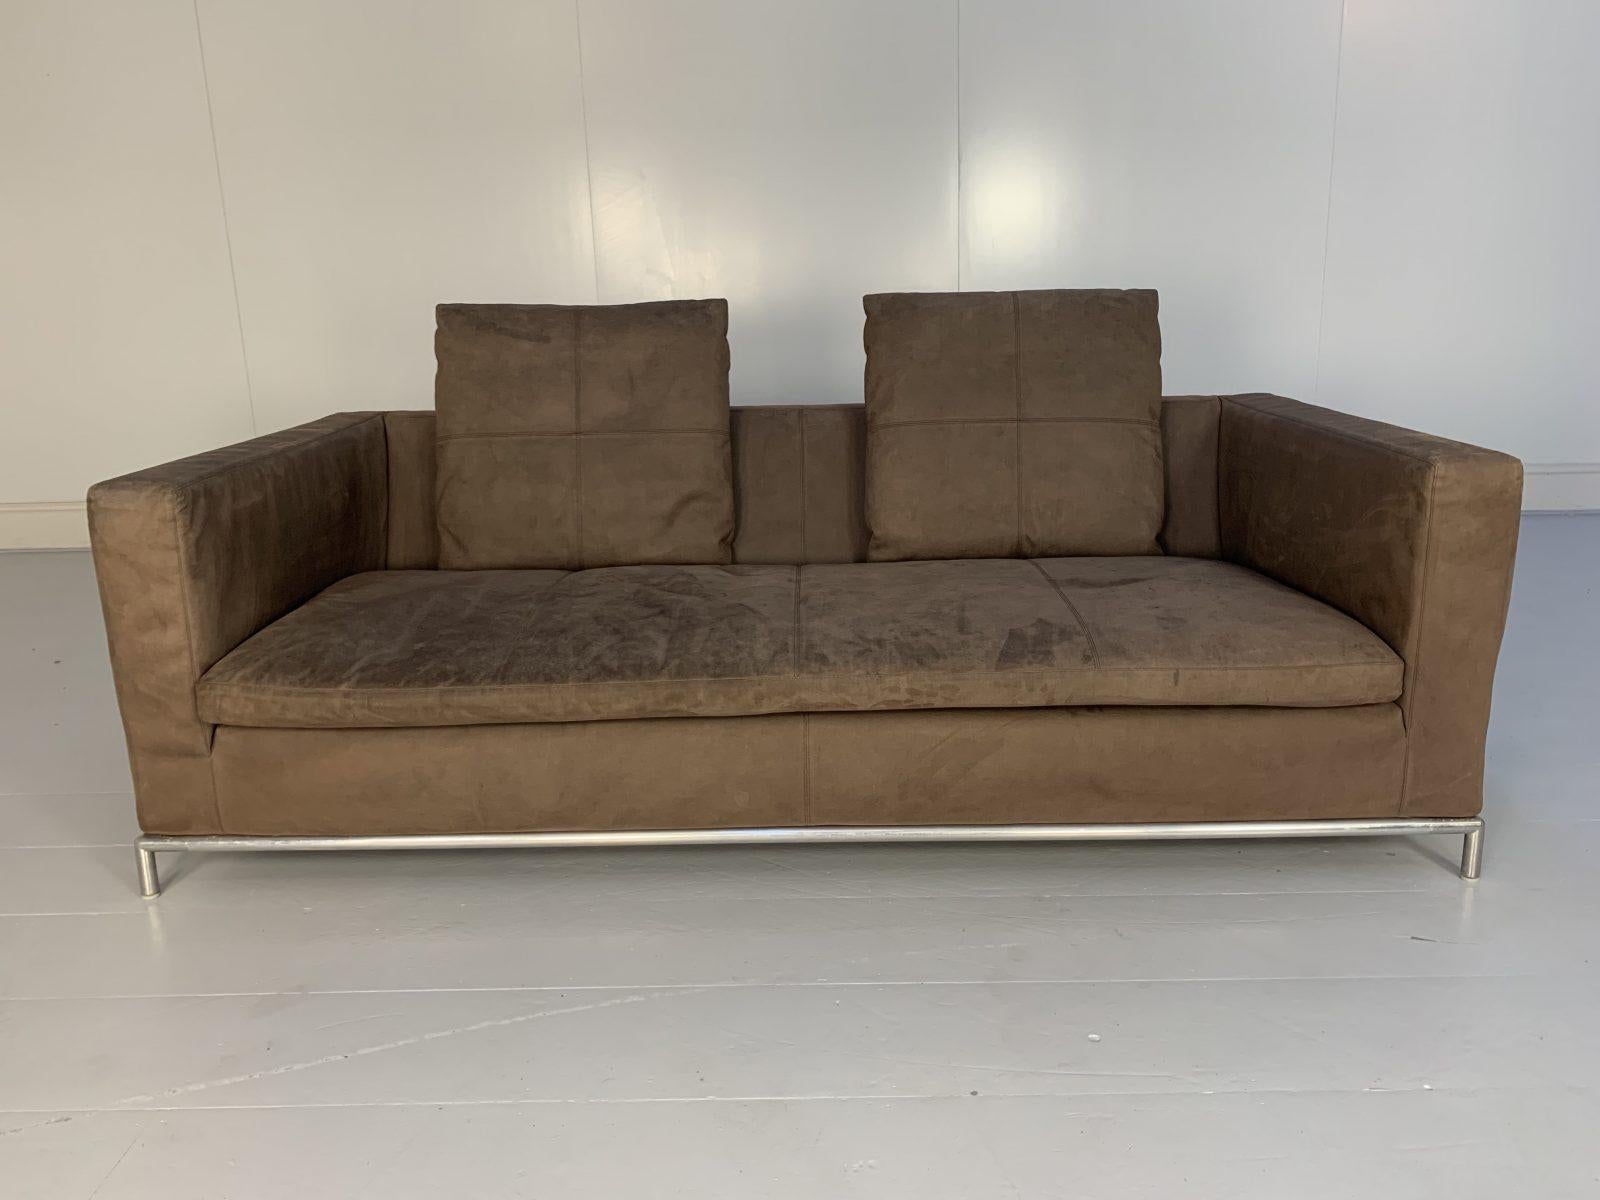 This is a rare, superb “George GS197” 2.5-Seat Sofa from the world renown Italian furniture house, B&B Italia.

In a world of temporary pleasures, B&B Italia create beautiful furniture that remains a joy forever.

Dressed in the most stunning